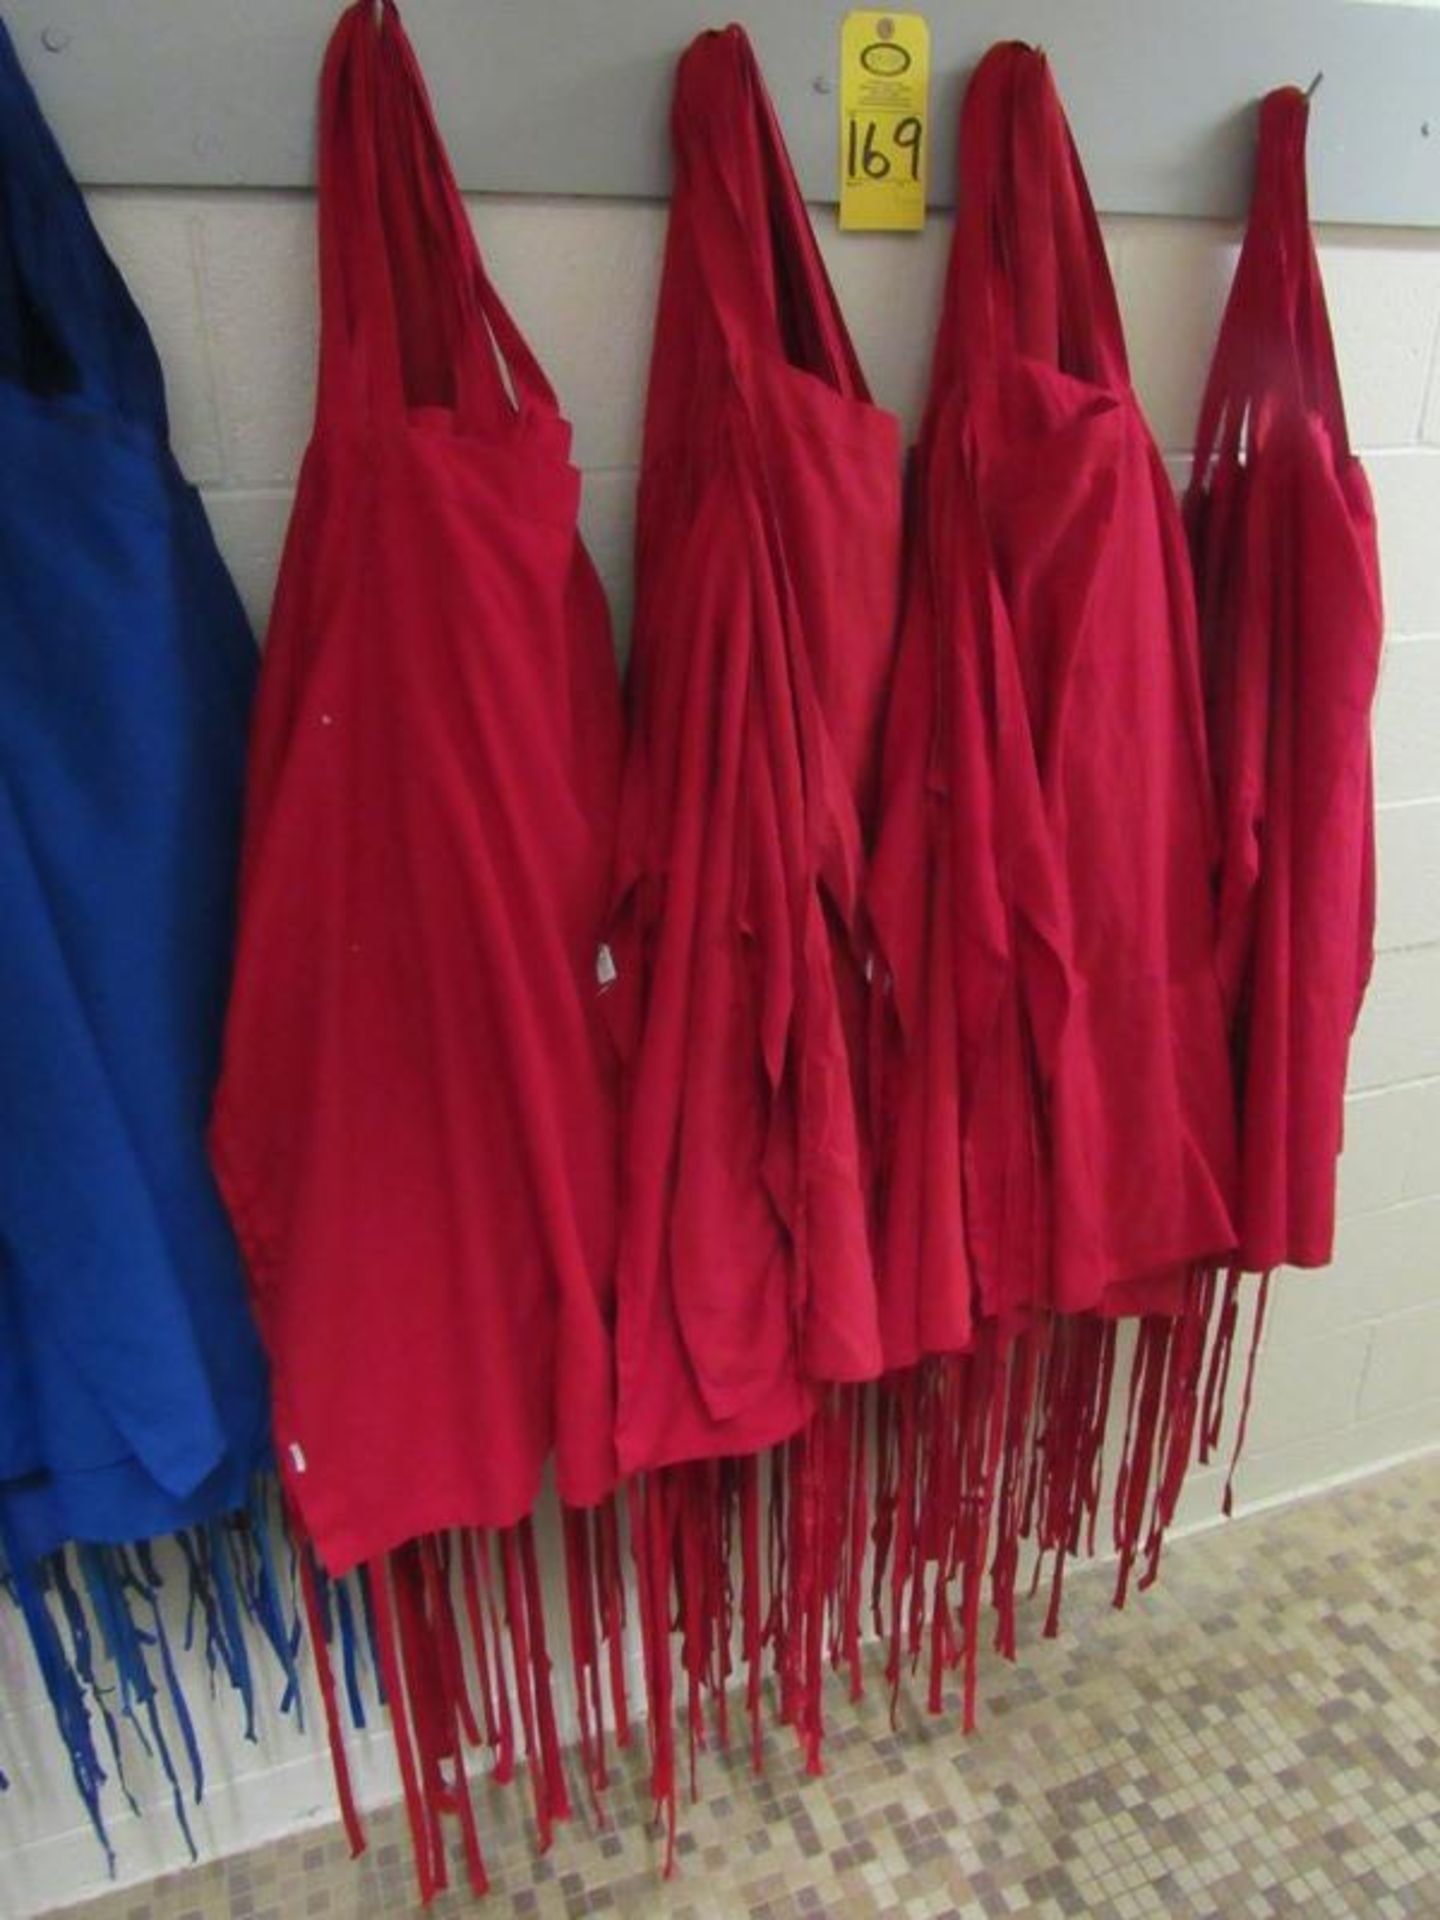 Red Cotton Blend Aprons (Required Loading Fee $10.00 - Small Items Will Be Loaded Curb Side. Norm